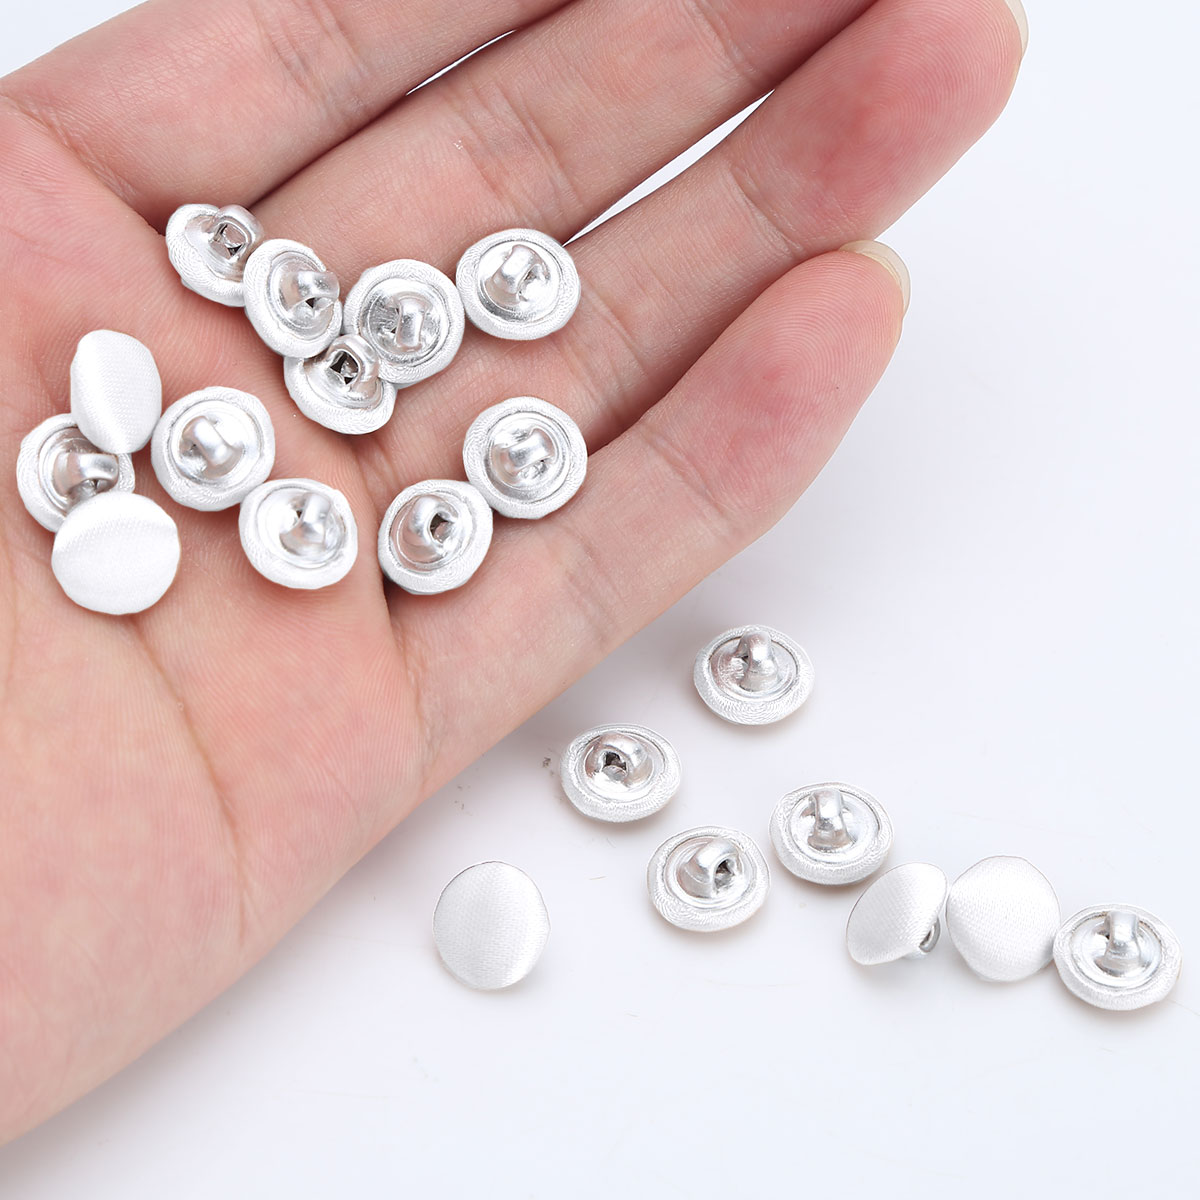 11Pcs Tuxedo Suit Buttons Set Grey Smooth Satin Covered Shank Buttons Sewing Accessories